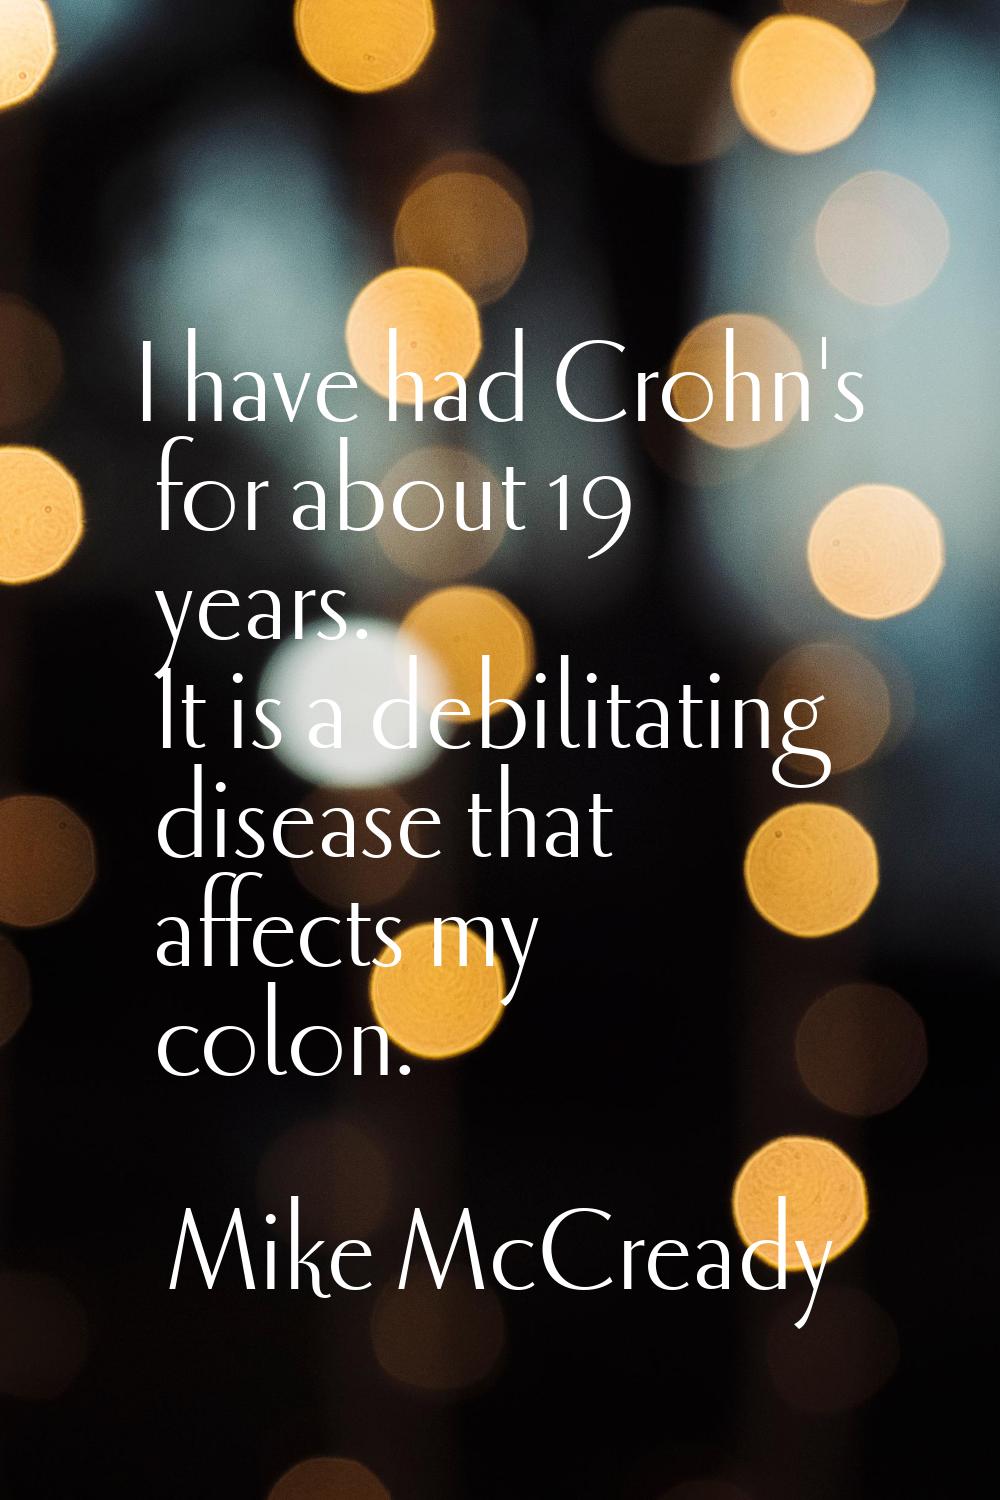 I have had Crohn's for about 19 years. It is a debilitating disease that affects my colon.